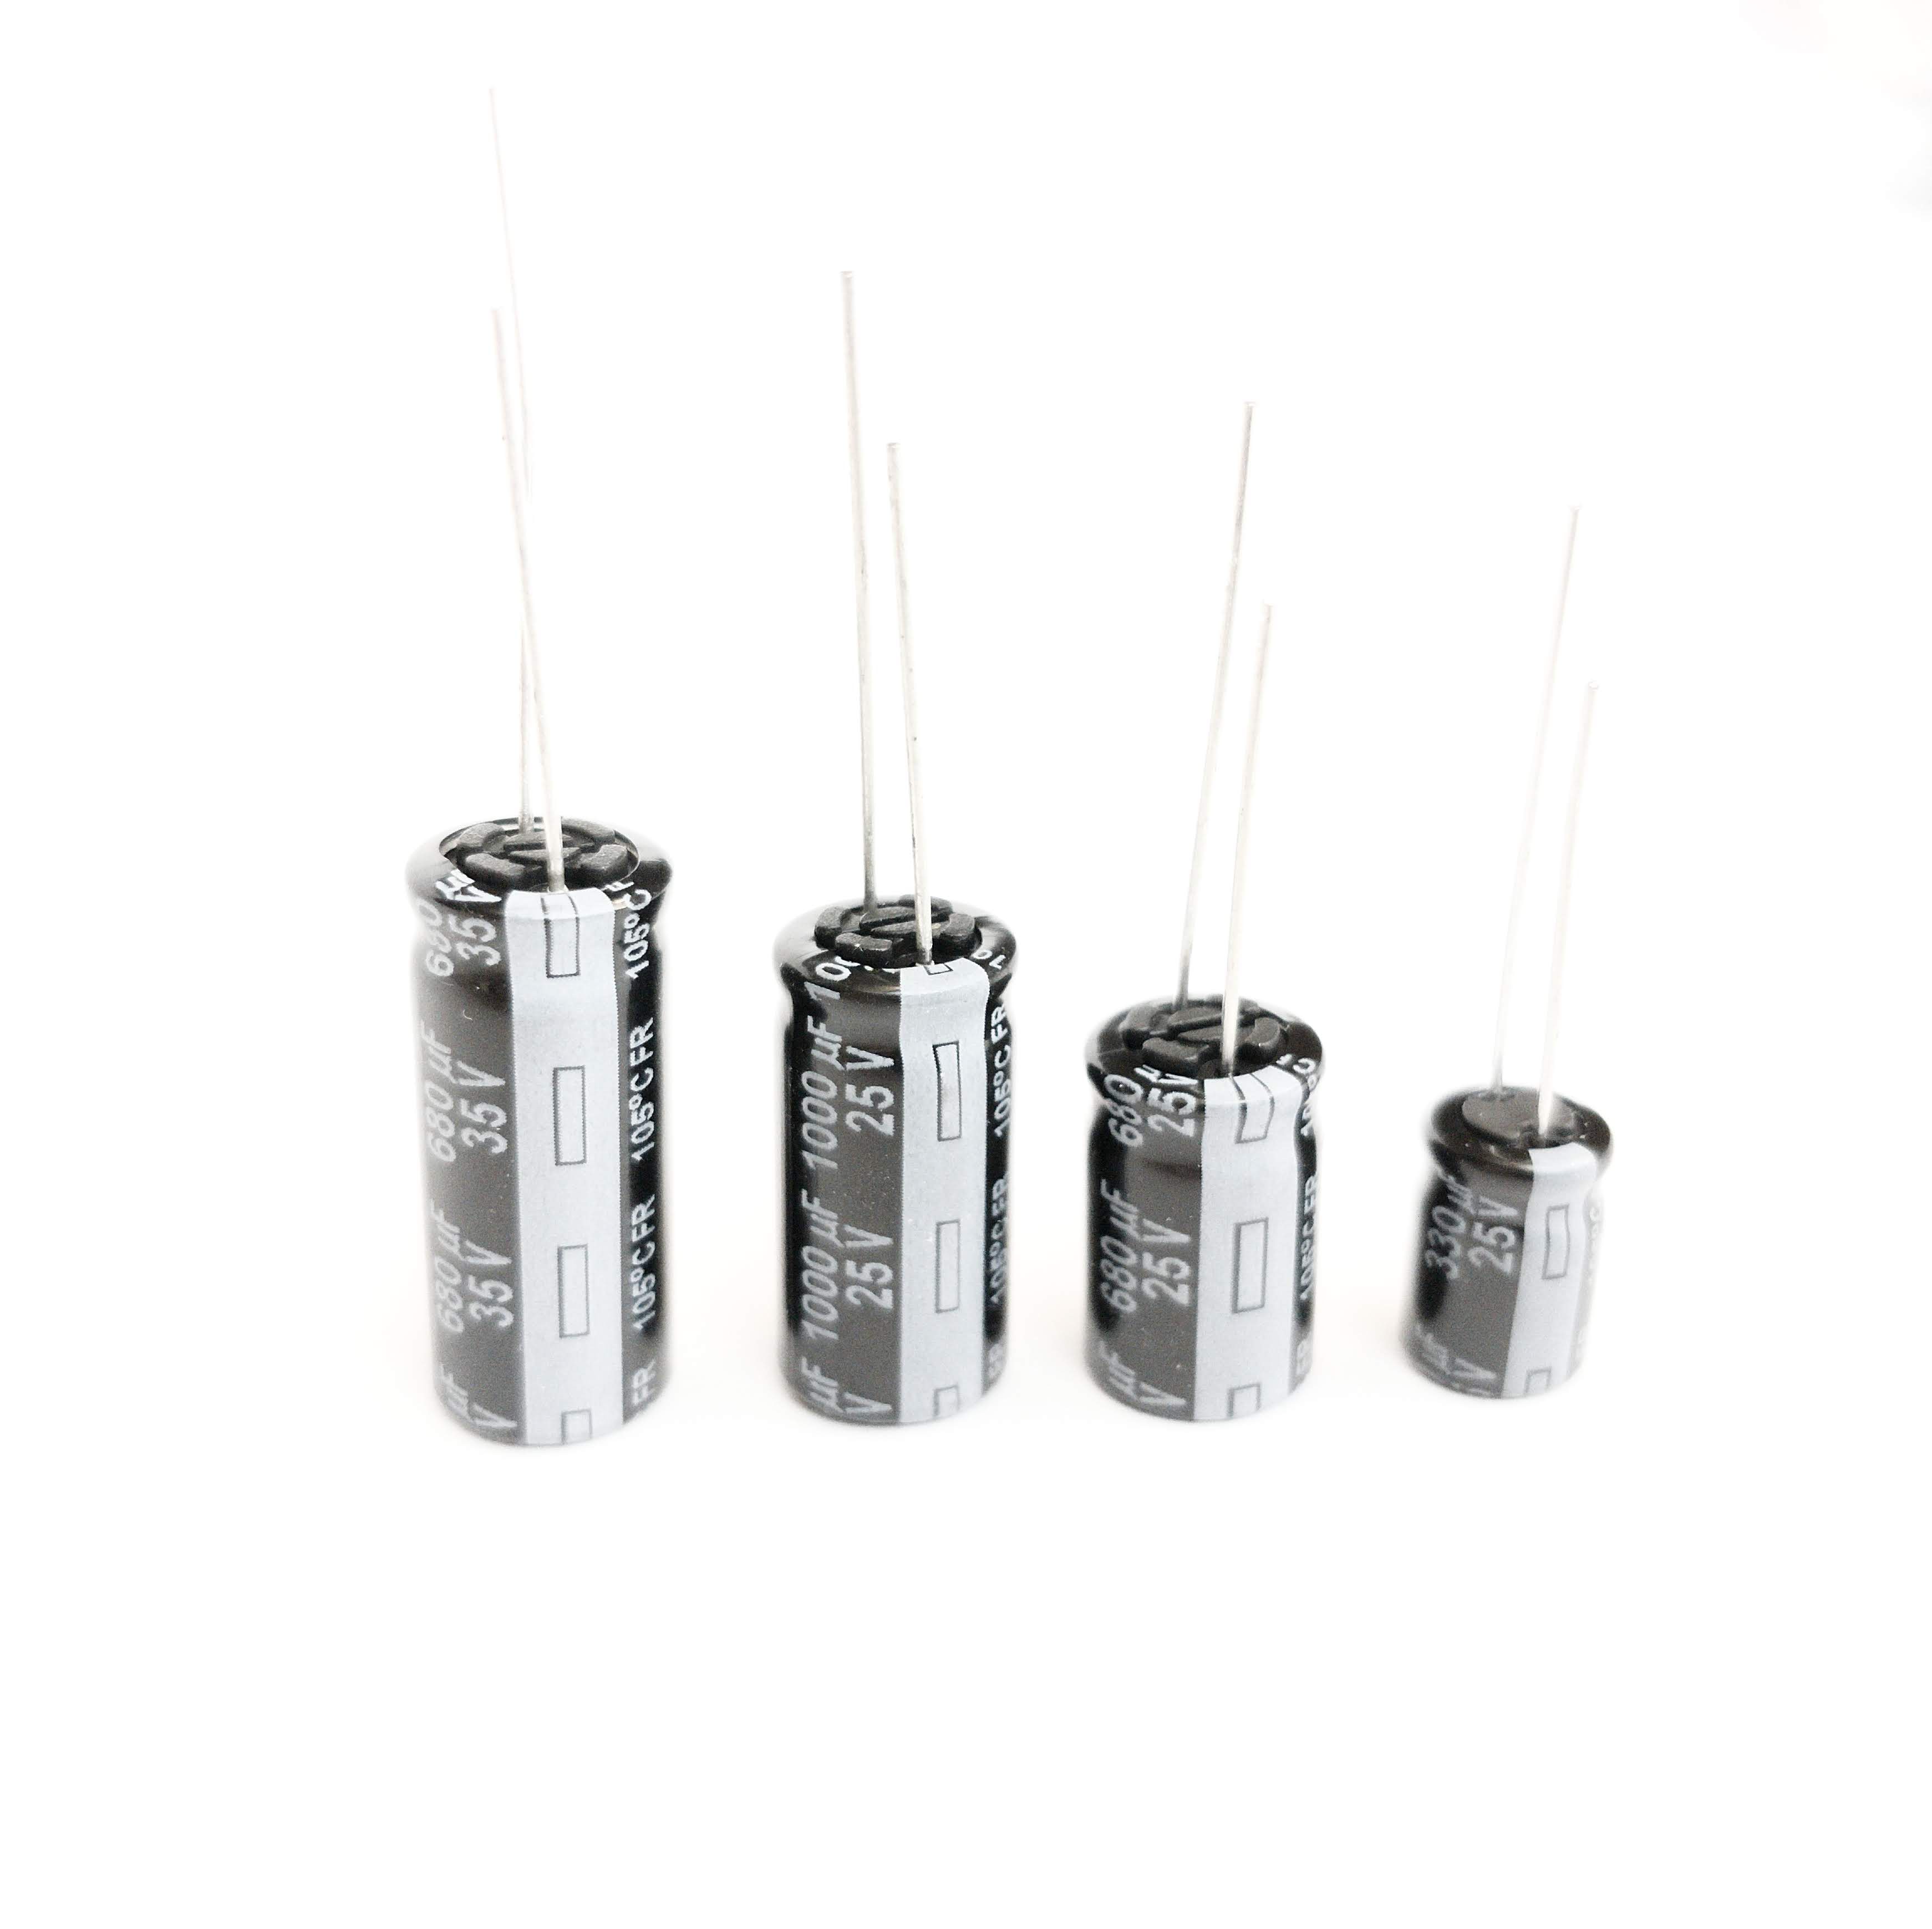 4x Low ESR capacitors different sizes up to 6S